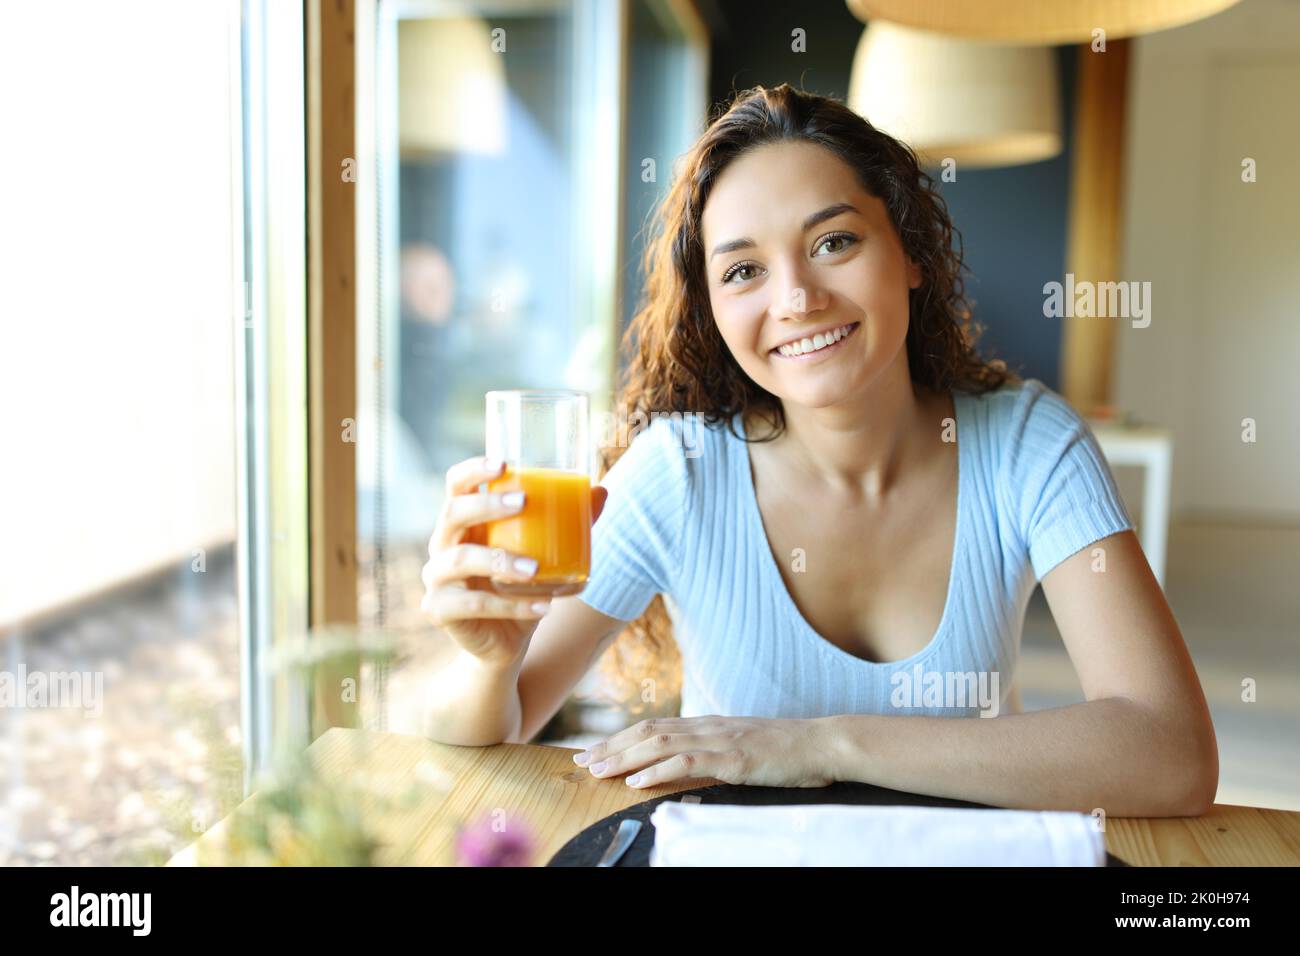 Woman holding orange juice glass looking at camera in a restaurant Stock Photo